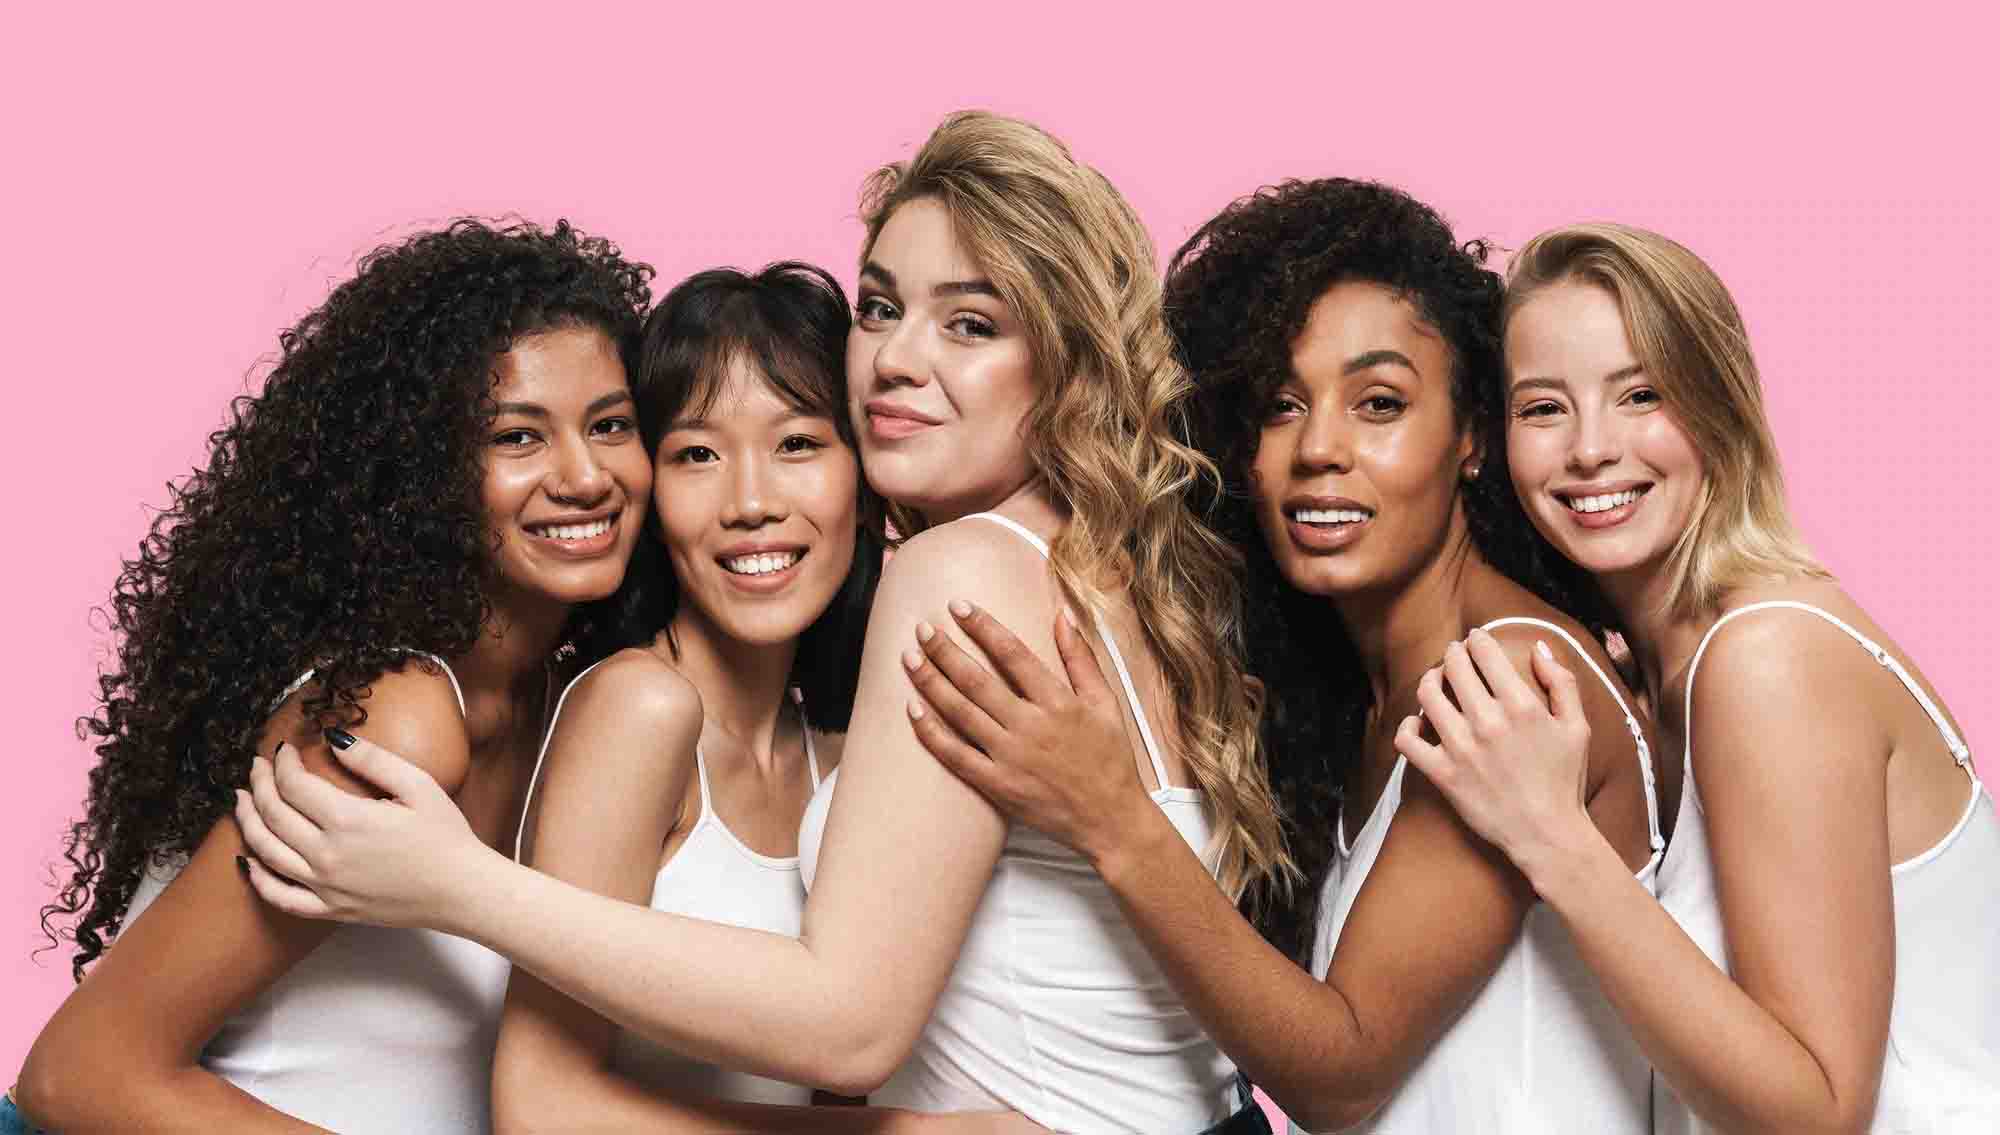 Five women embracing eachother and smiling 